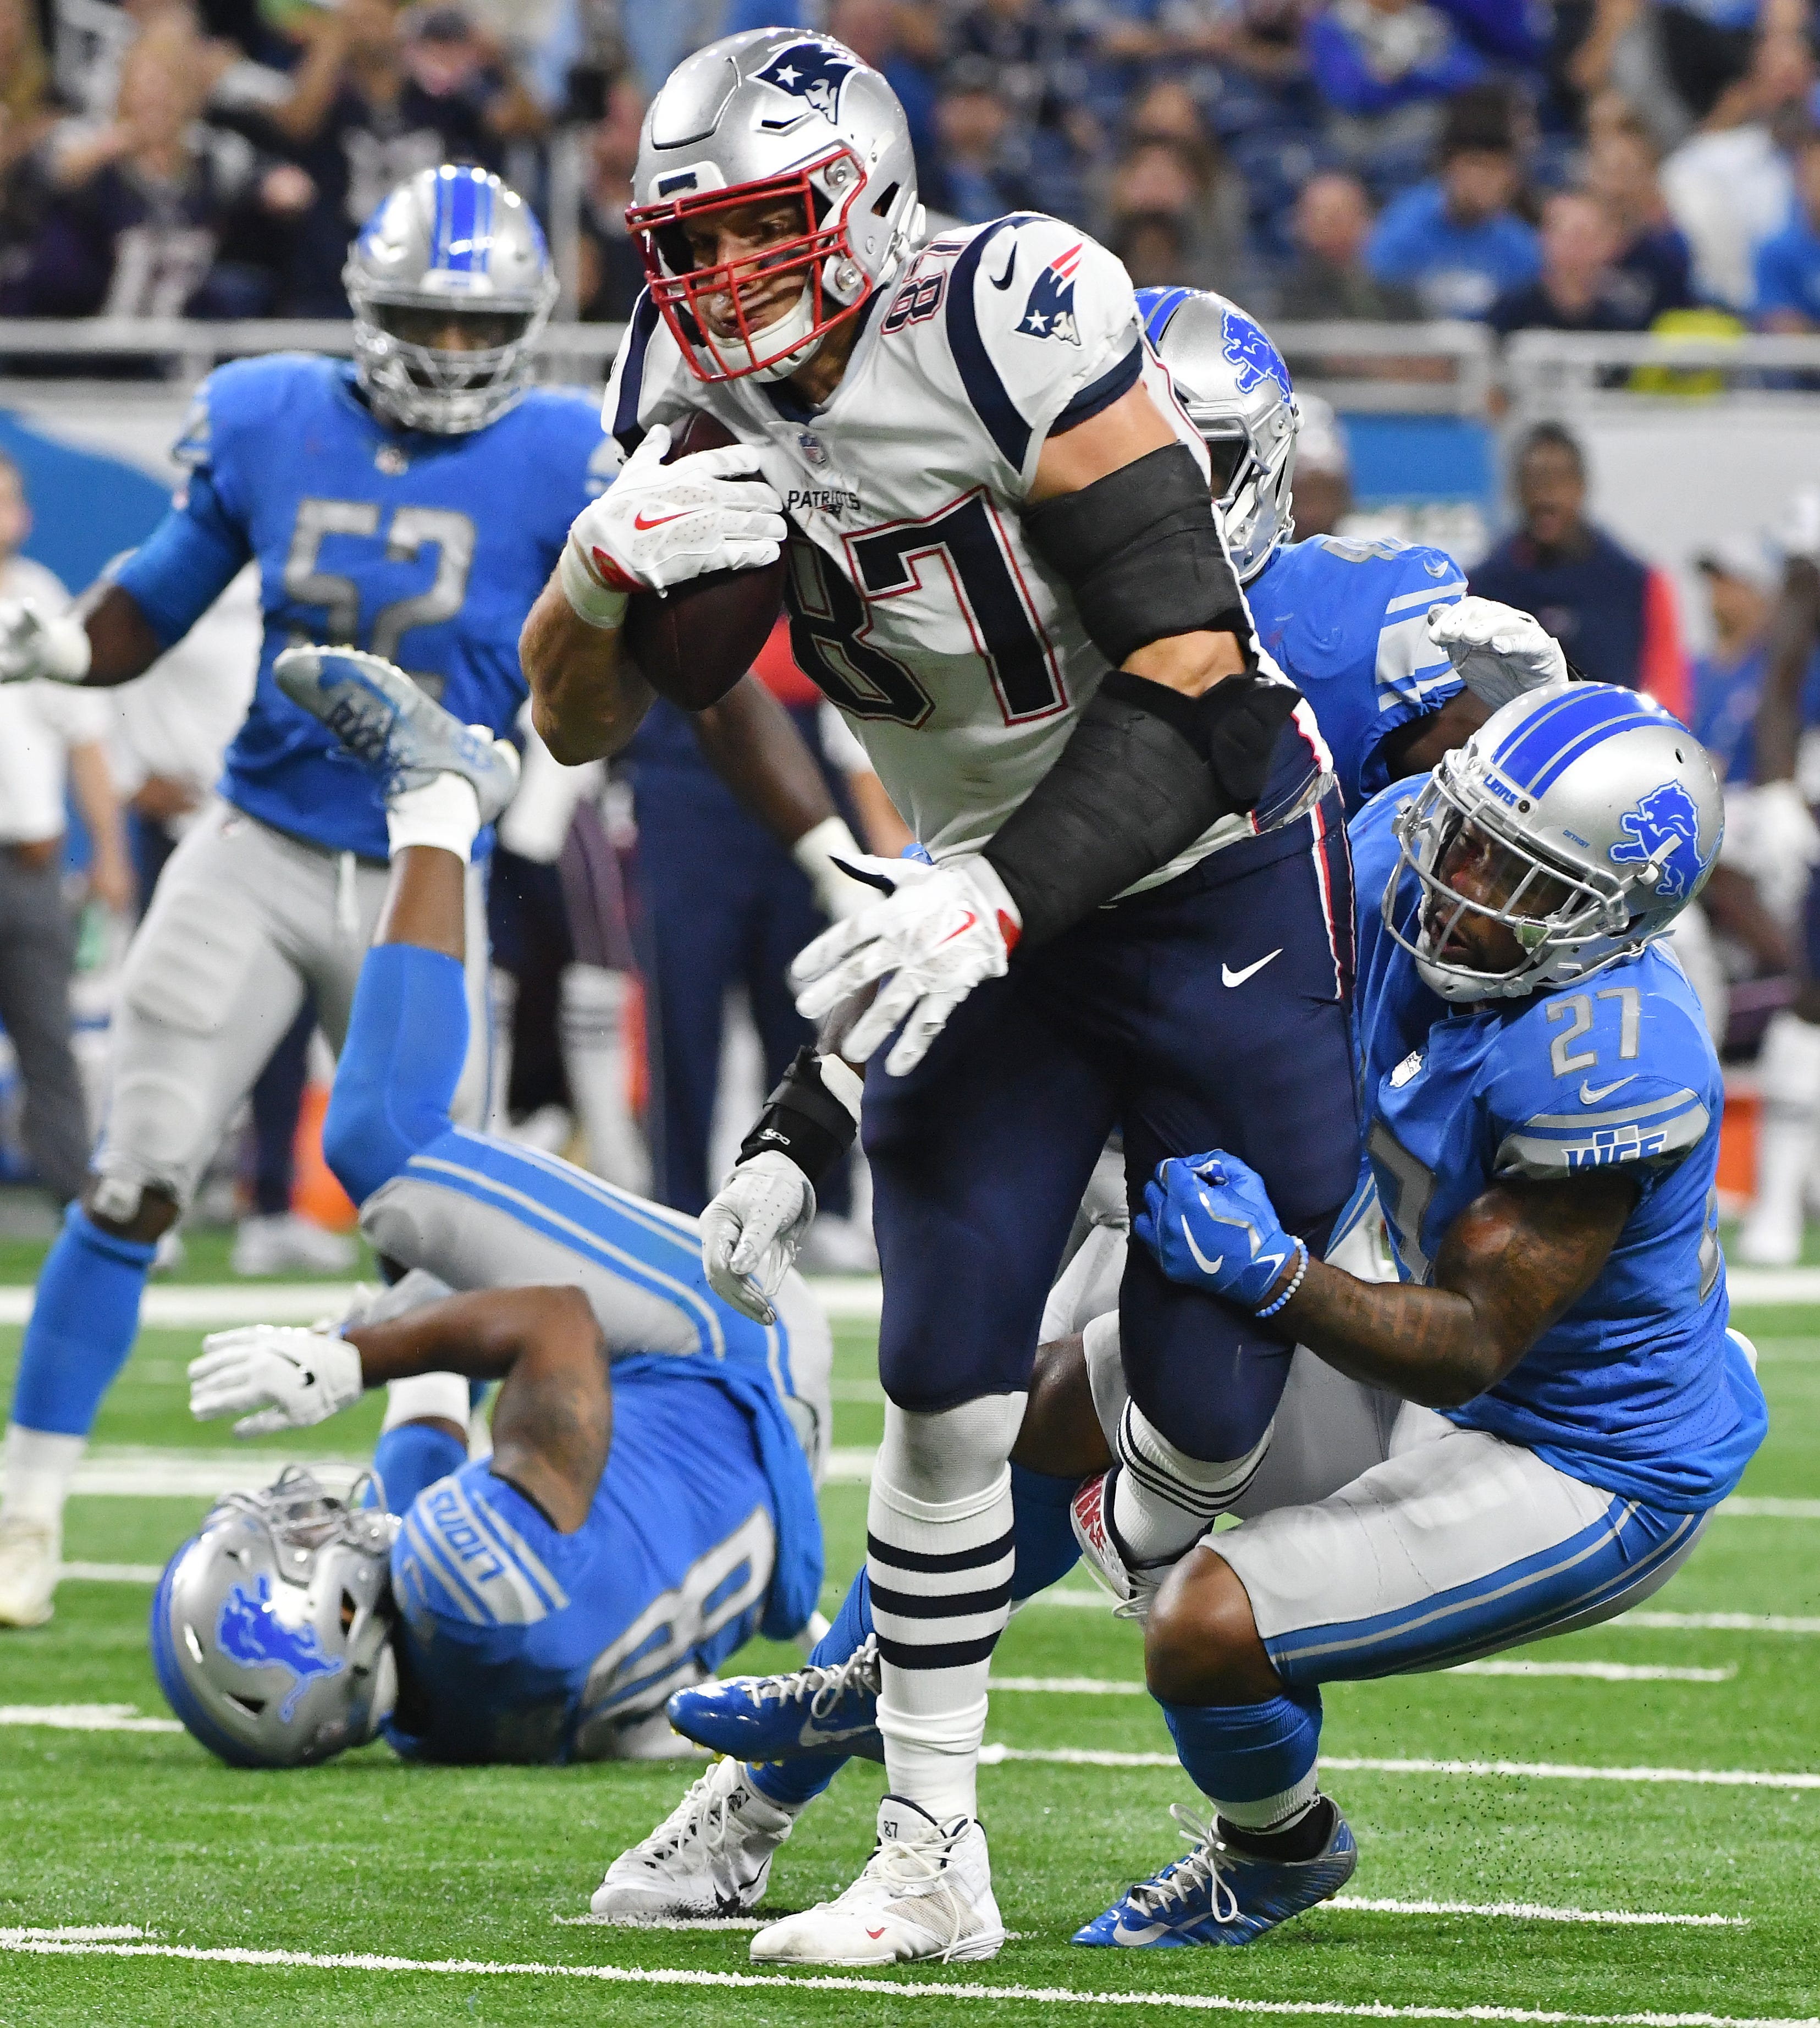 Patriots tight end Rob Gronkowski continues upfield after a reception leaving a wake of Lions defenders in his wake in the third quarter.